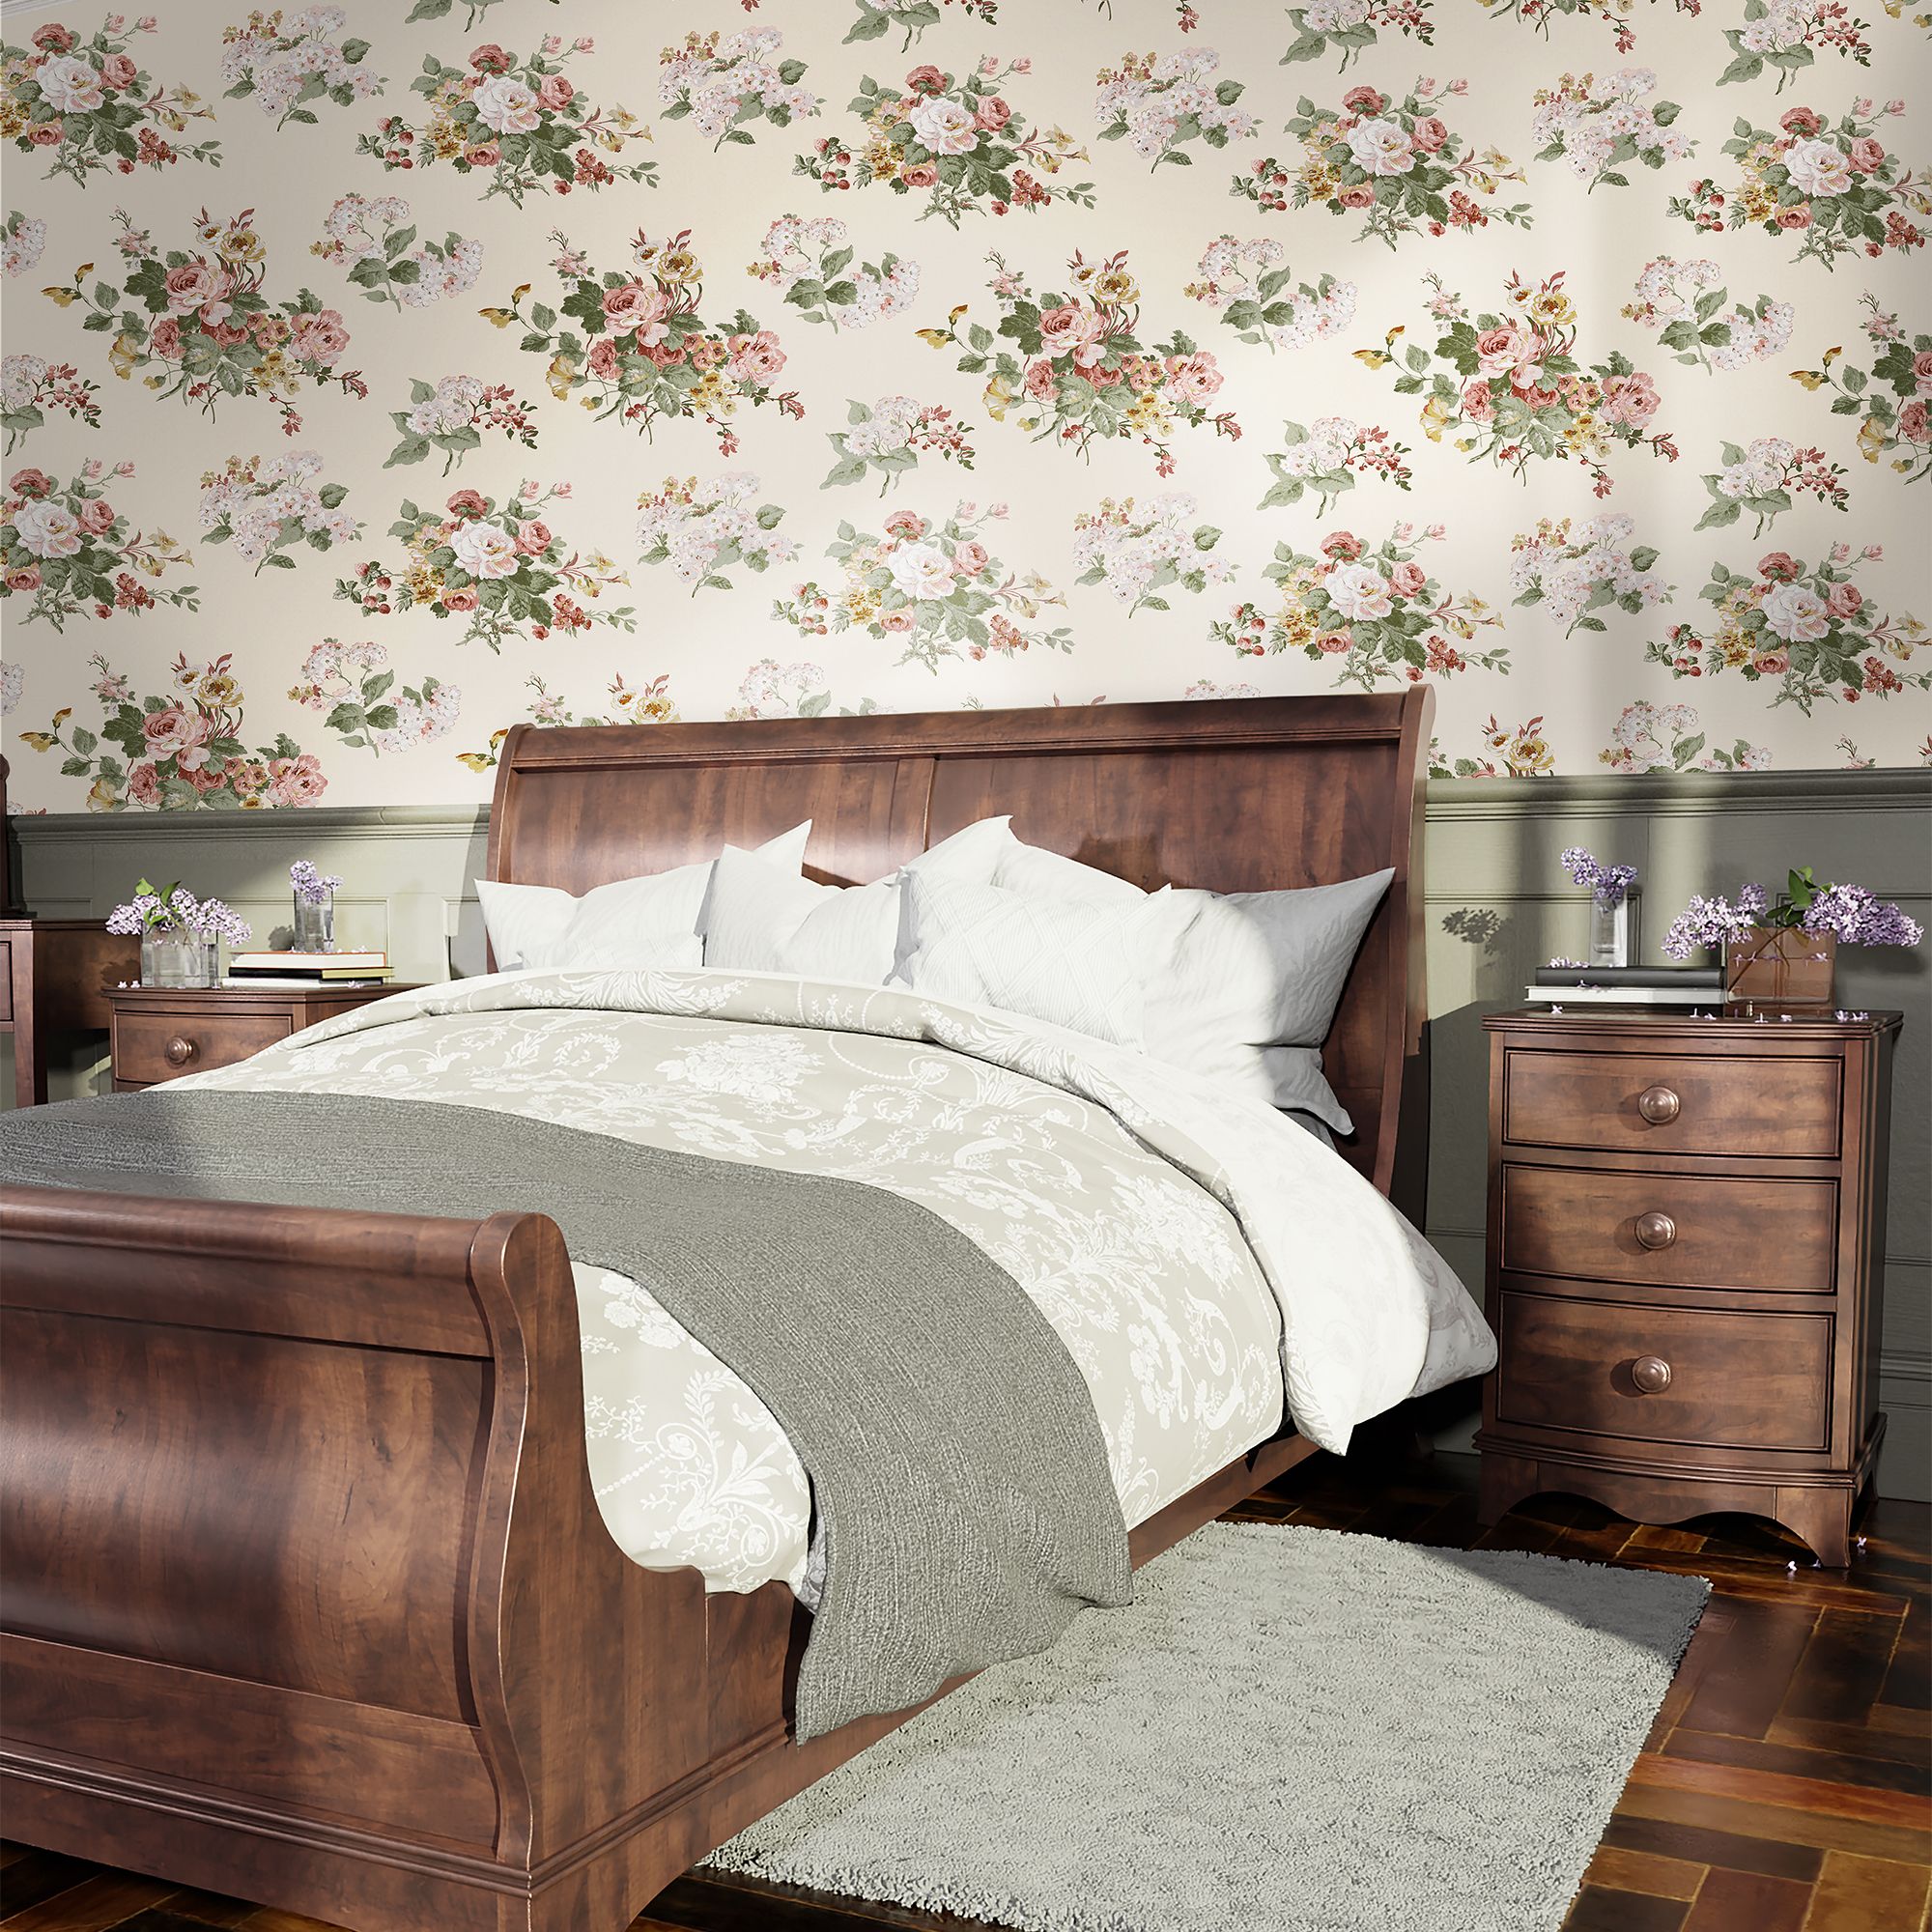 Laura Ashley Rosemore Pale sable Floral Smooth Wallpaper Sample